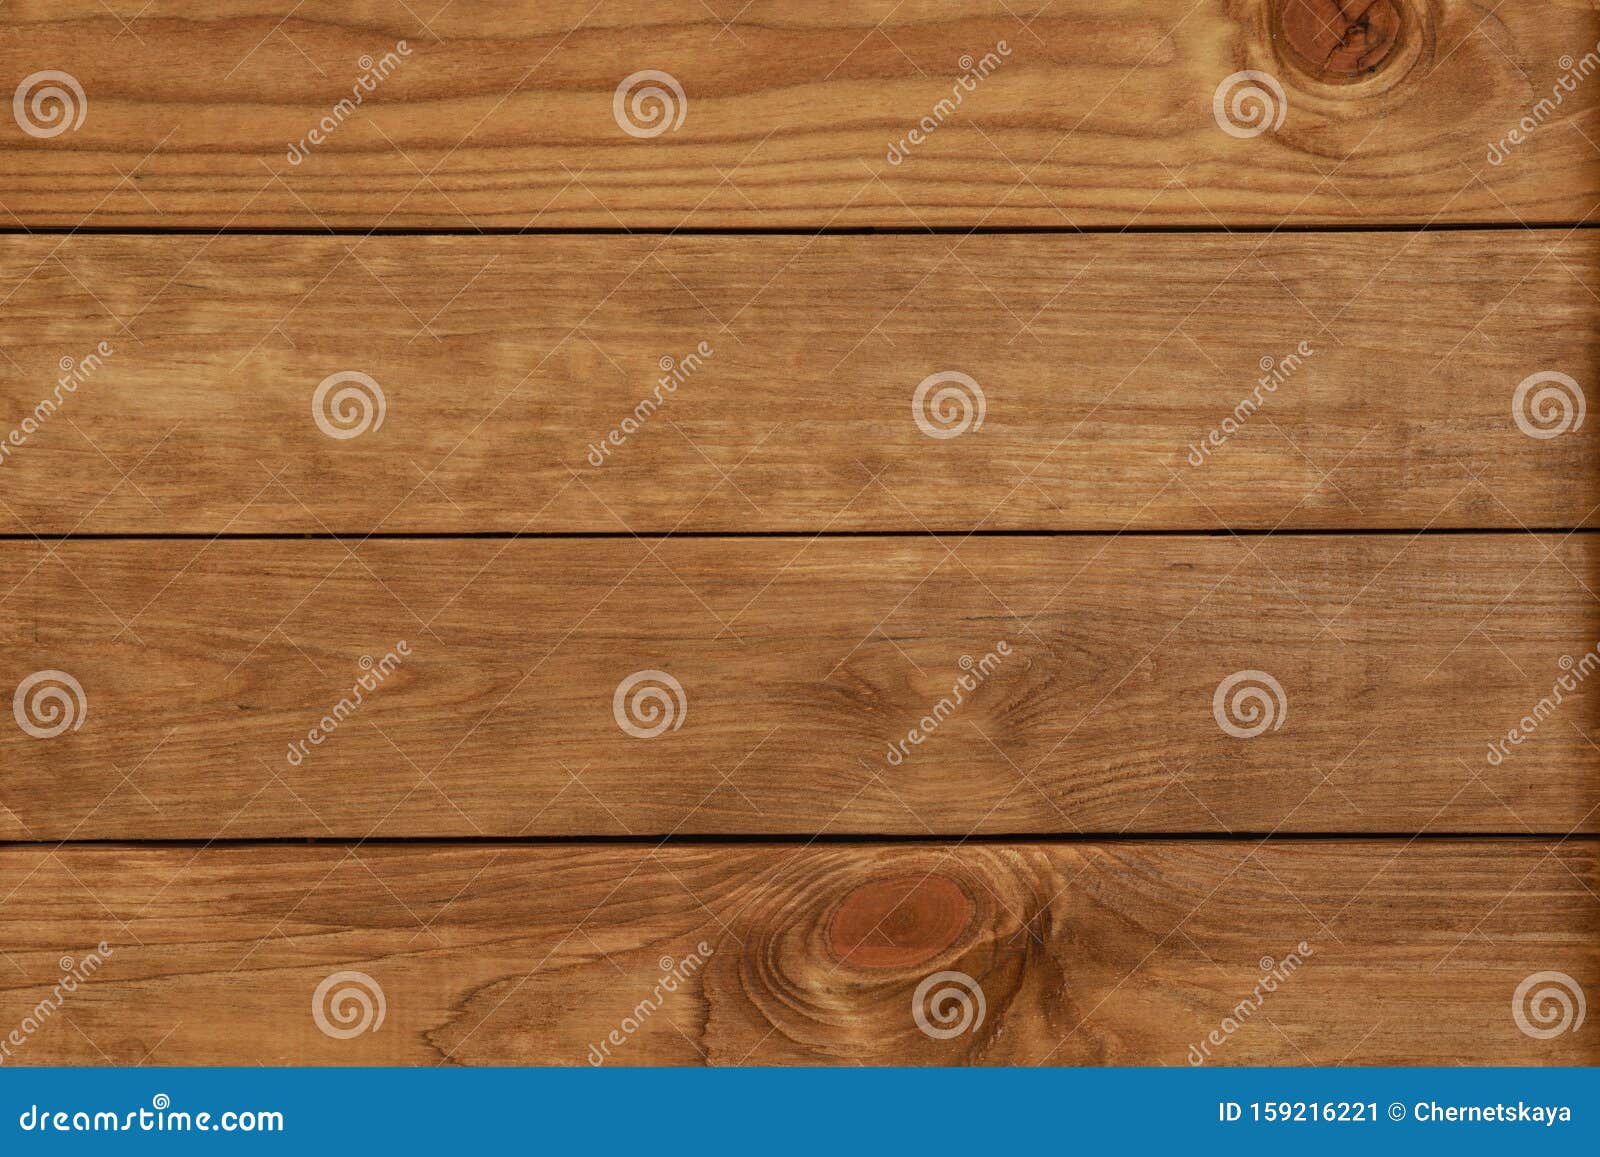 side of old wooden crate as background